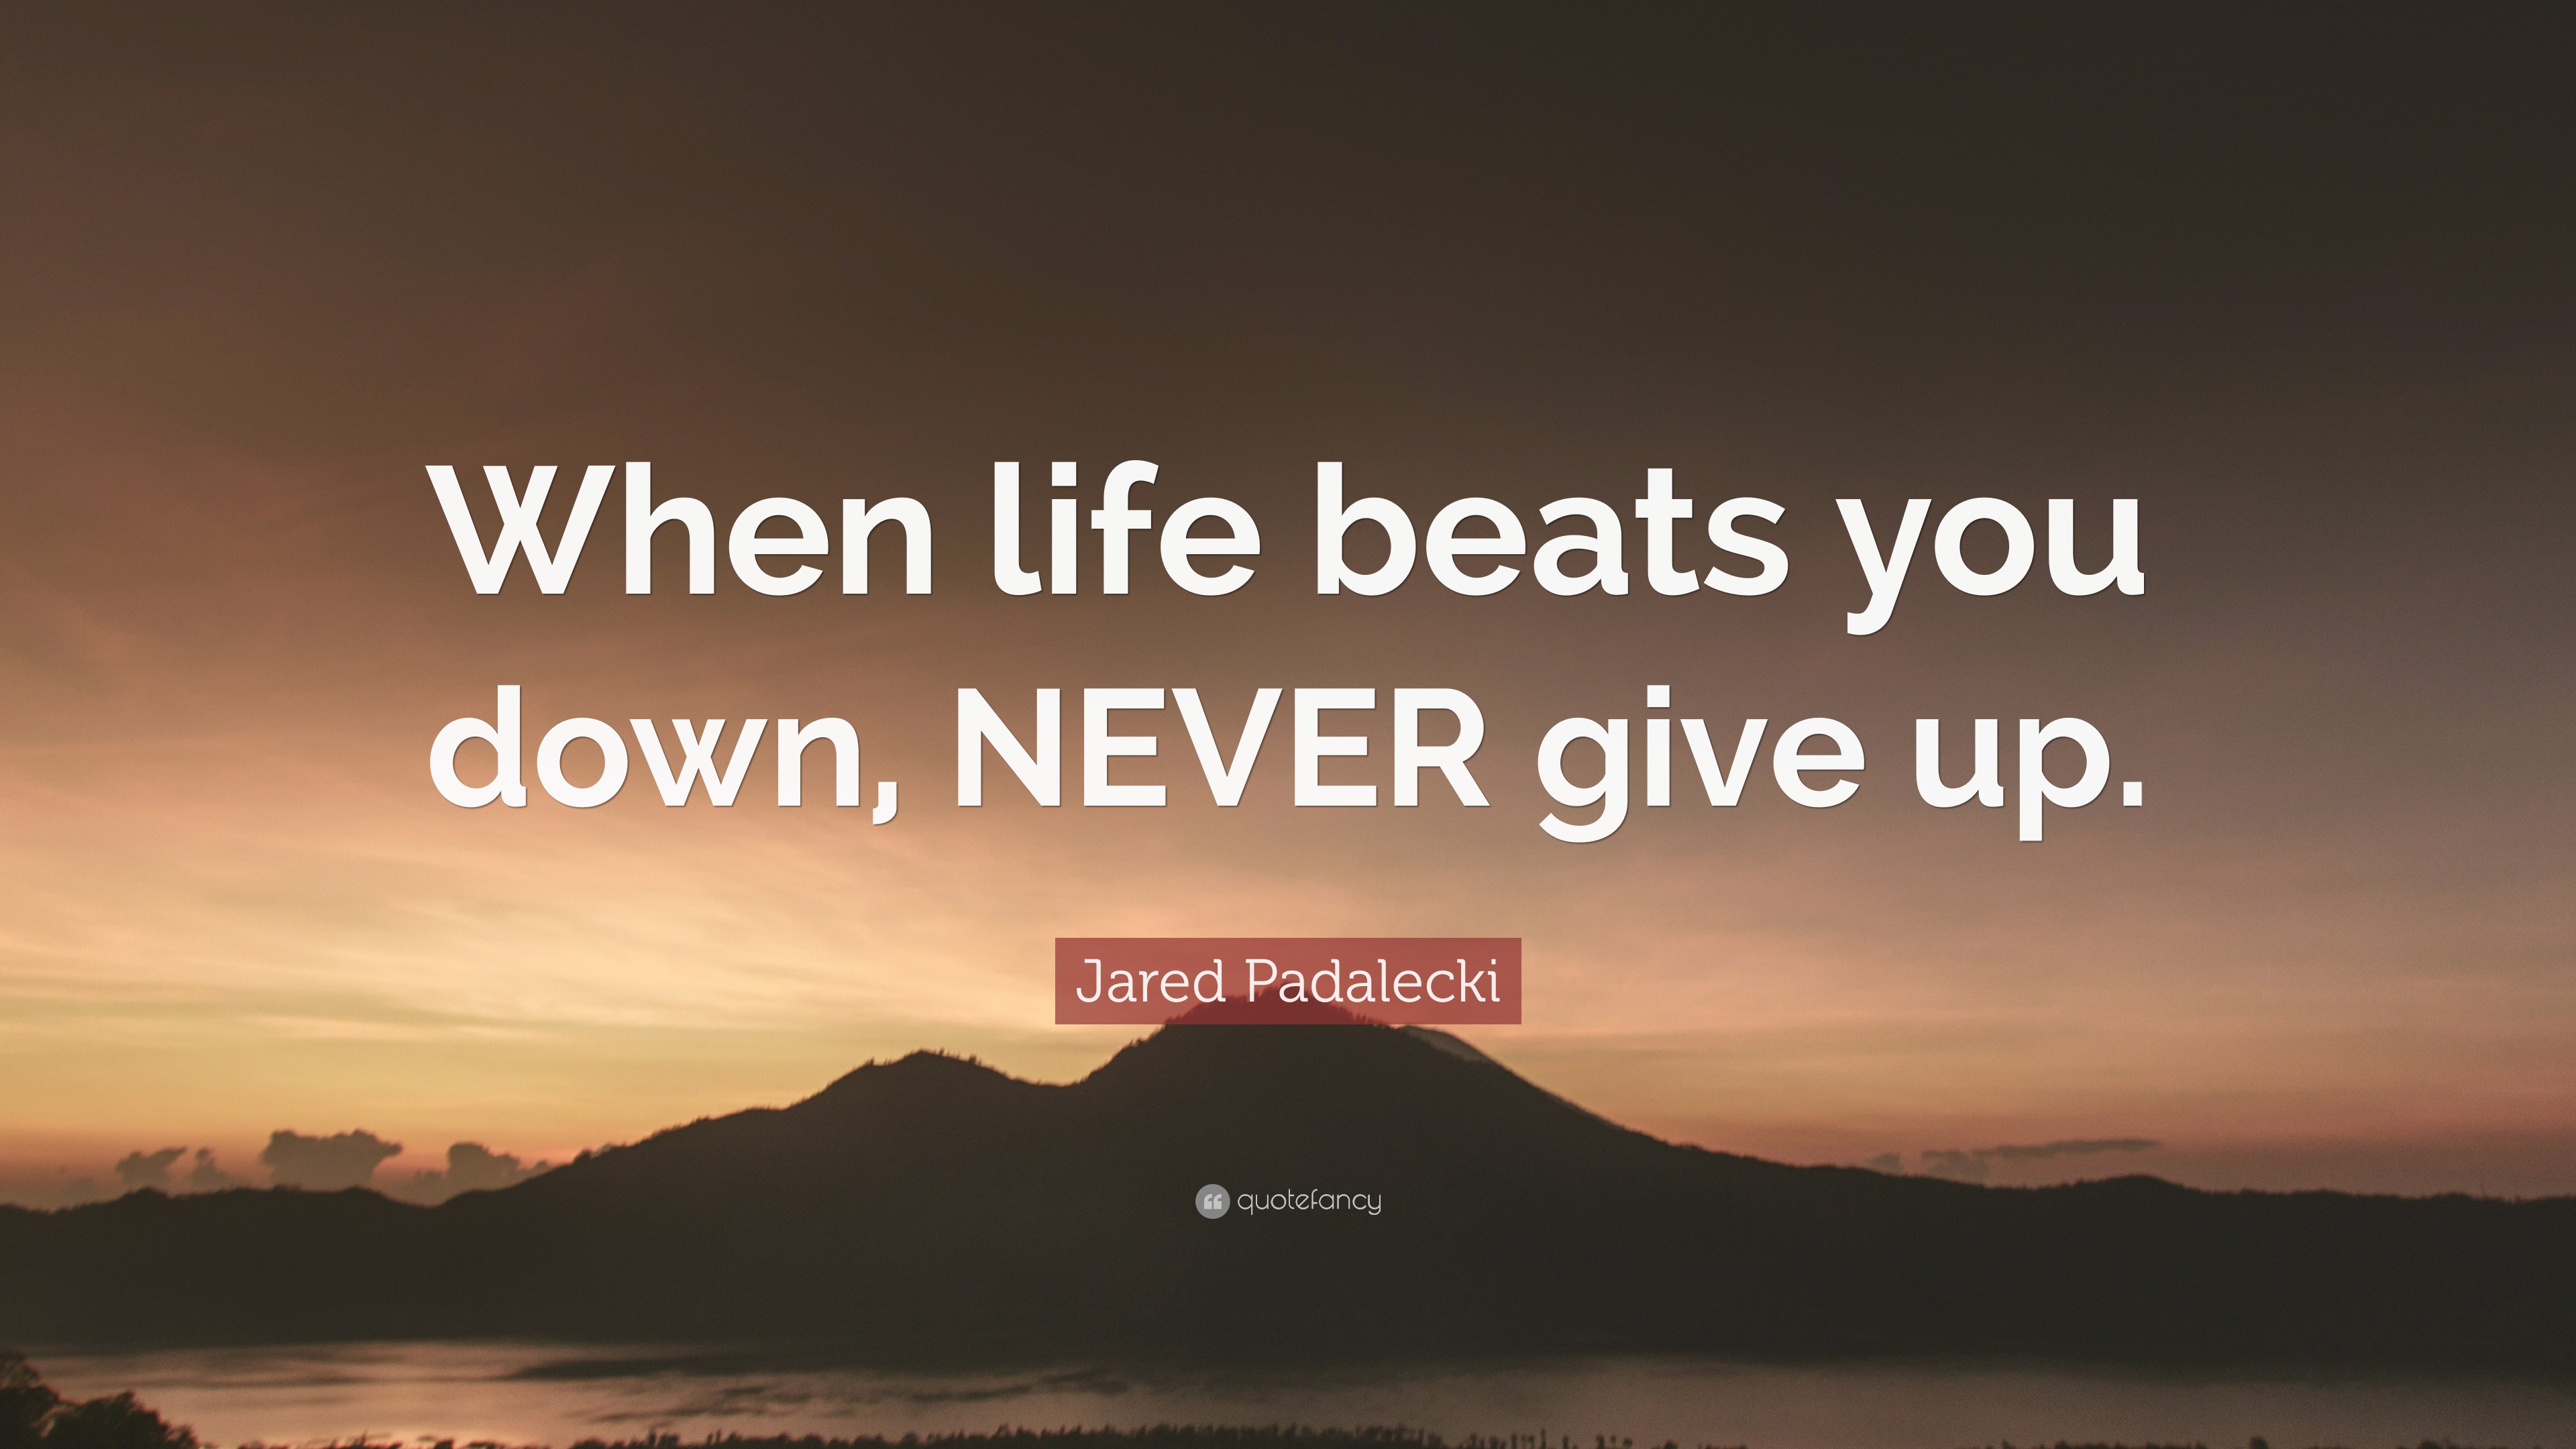 Jared Padalecki Quote When Life Beats You Down Never Give.